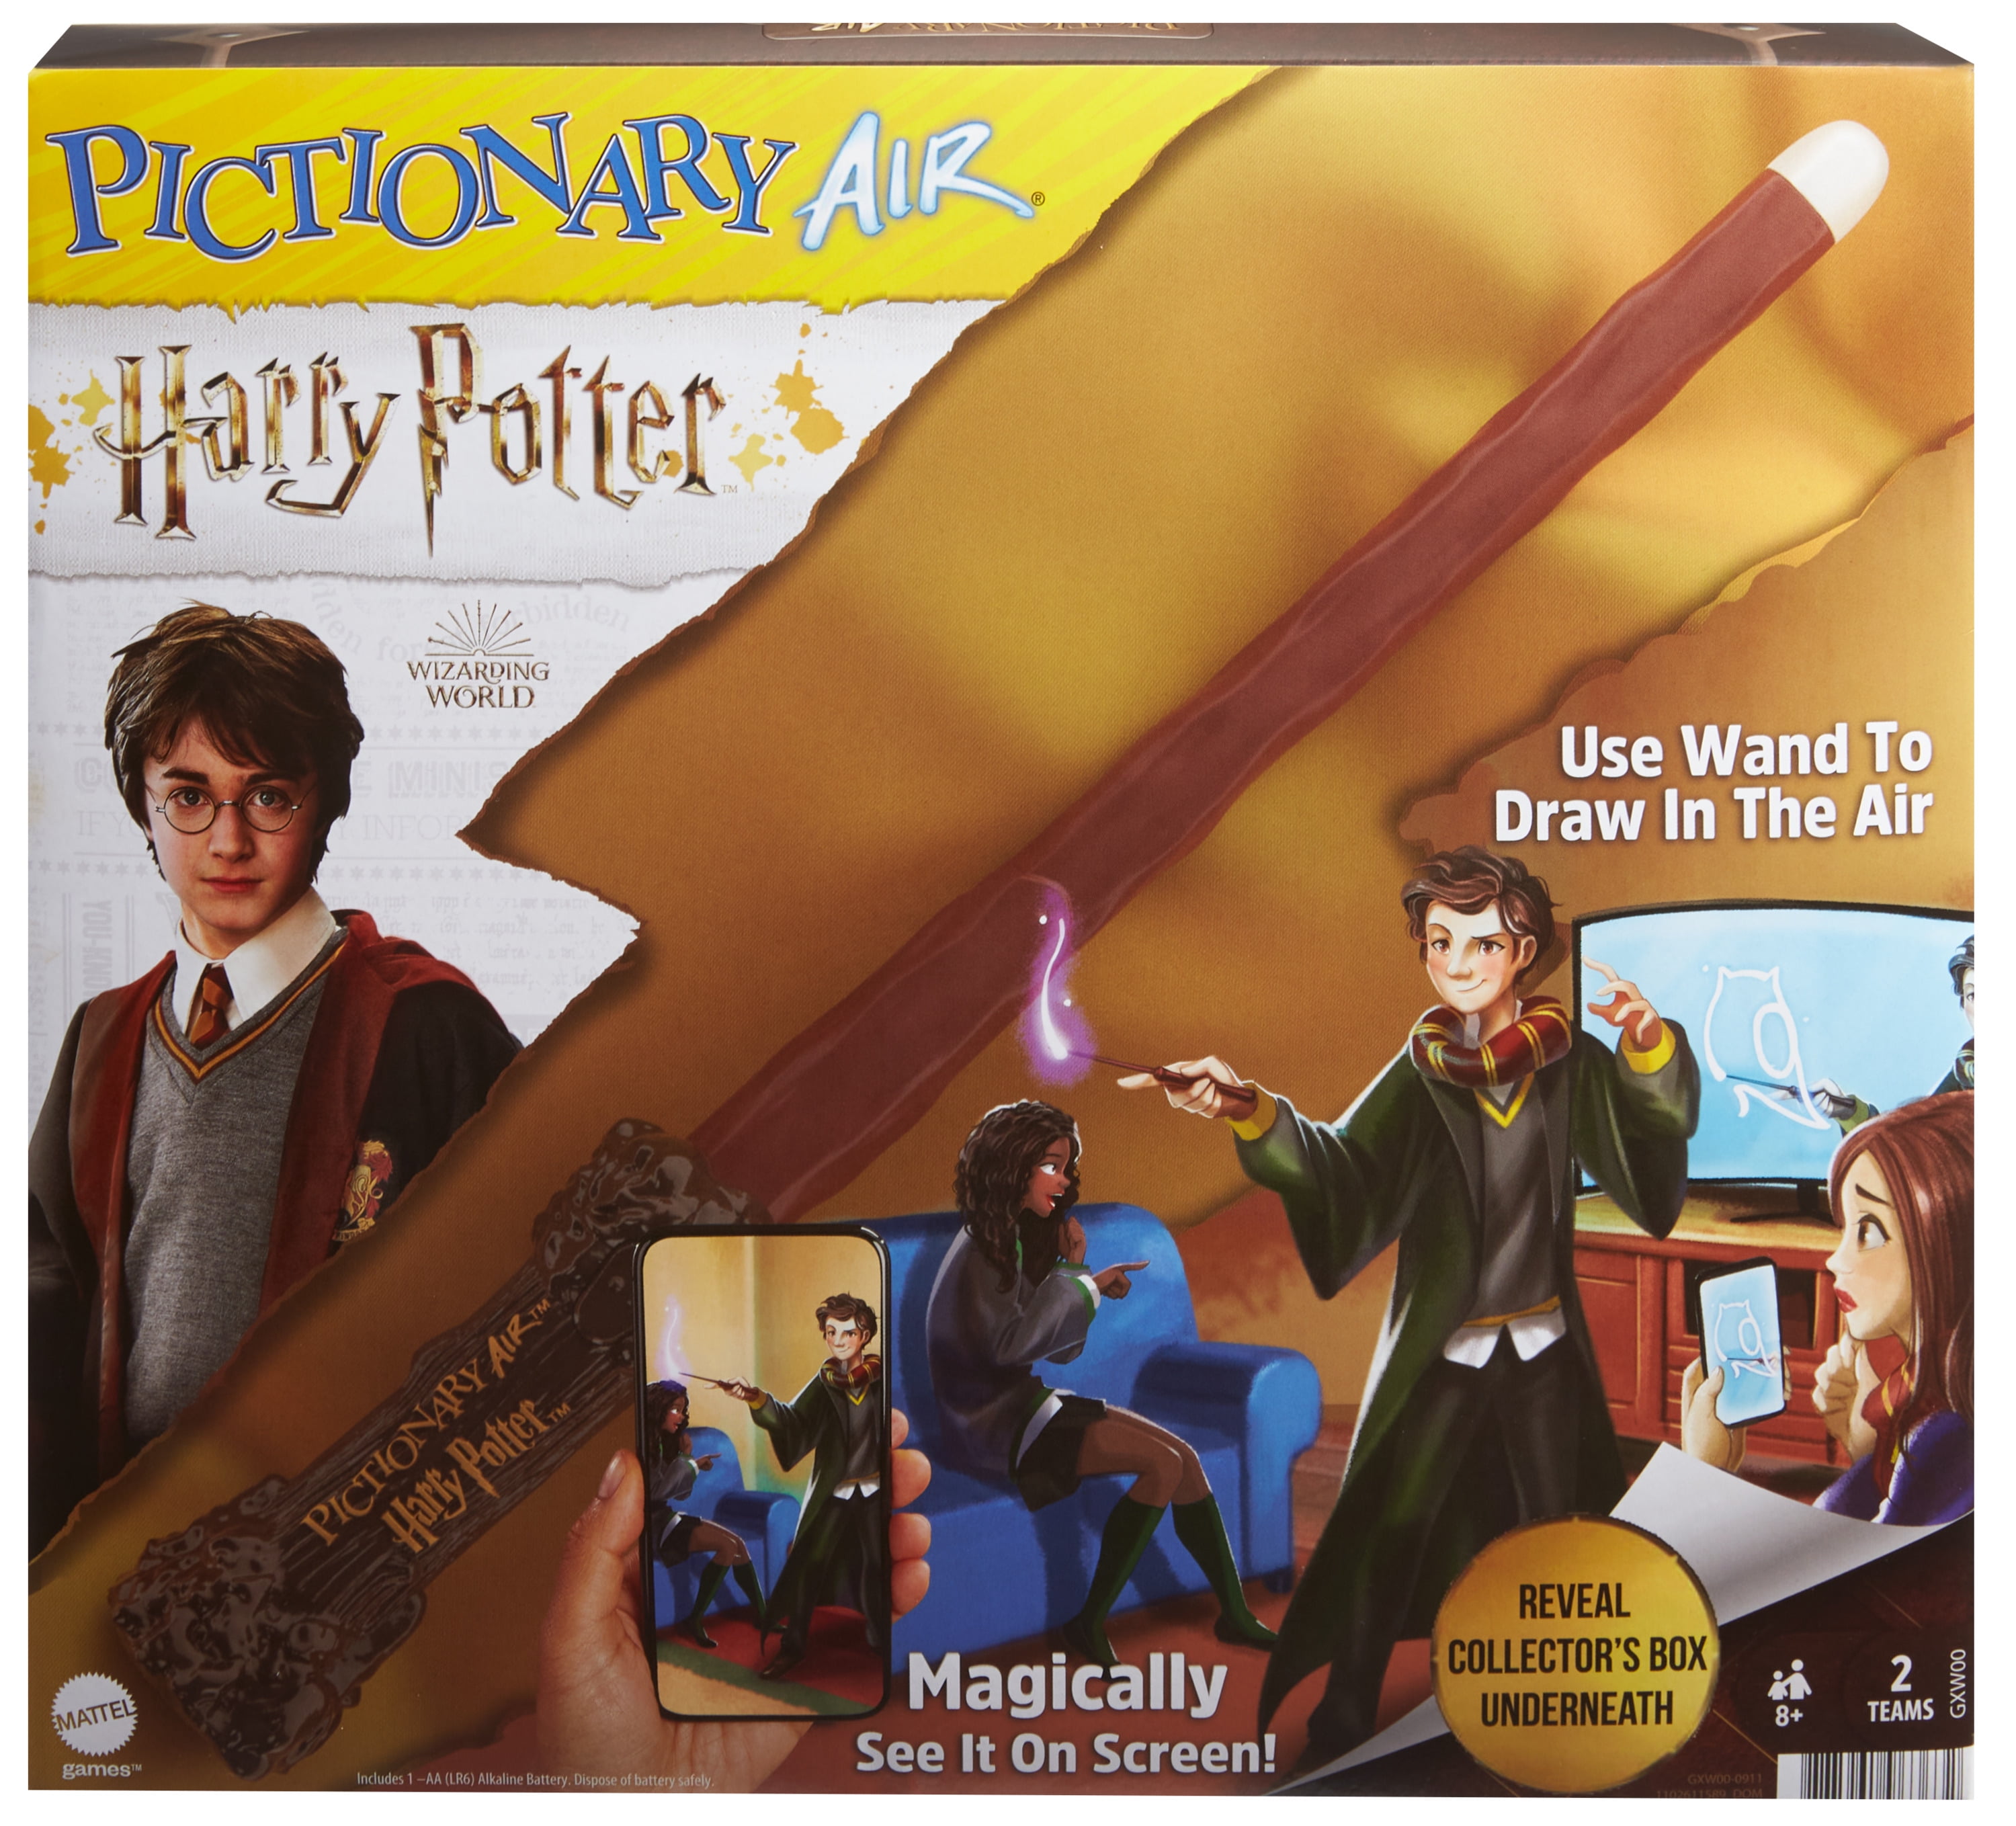  AQUARIUS Harry Potter Family Bingo Game - Fun Family Party Game  for Kids, Teens & Adults - Entertaining Game Night Gift - Officially  Licensed Harry Potter Merchandise : Toys & Games